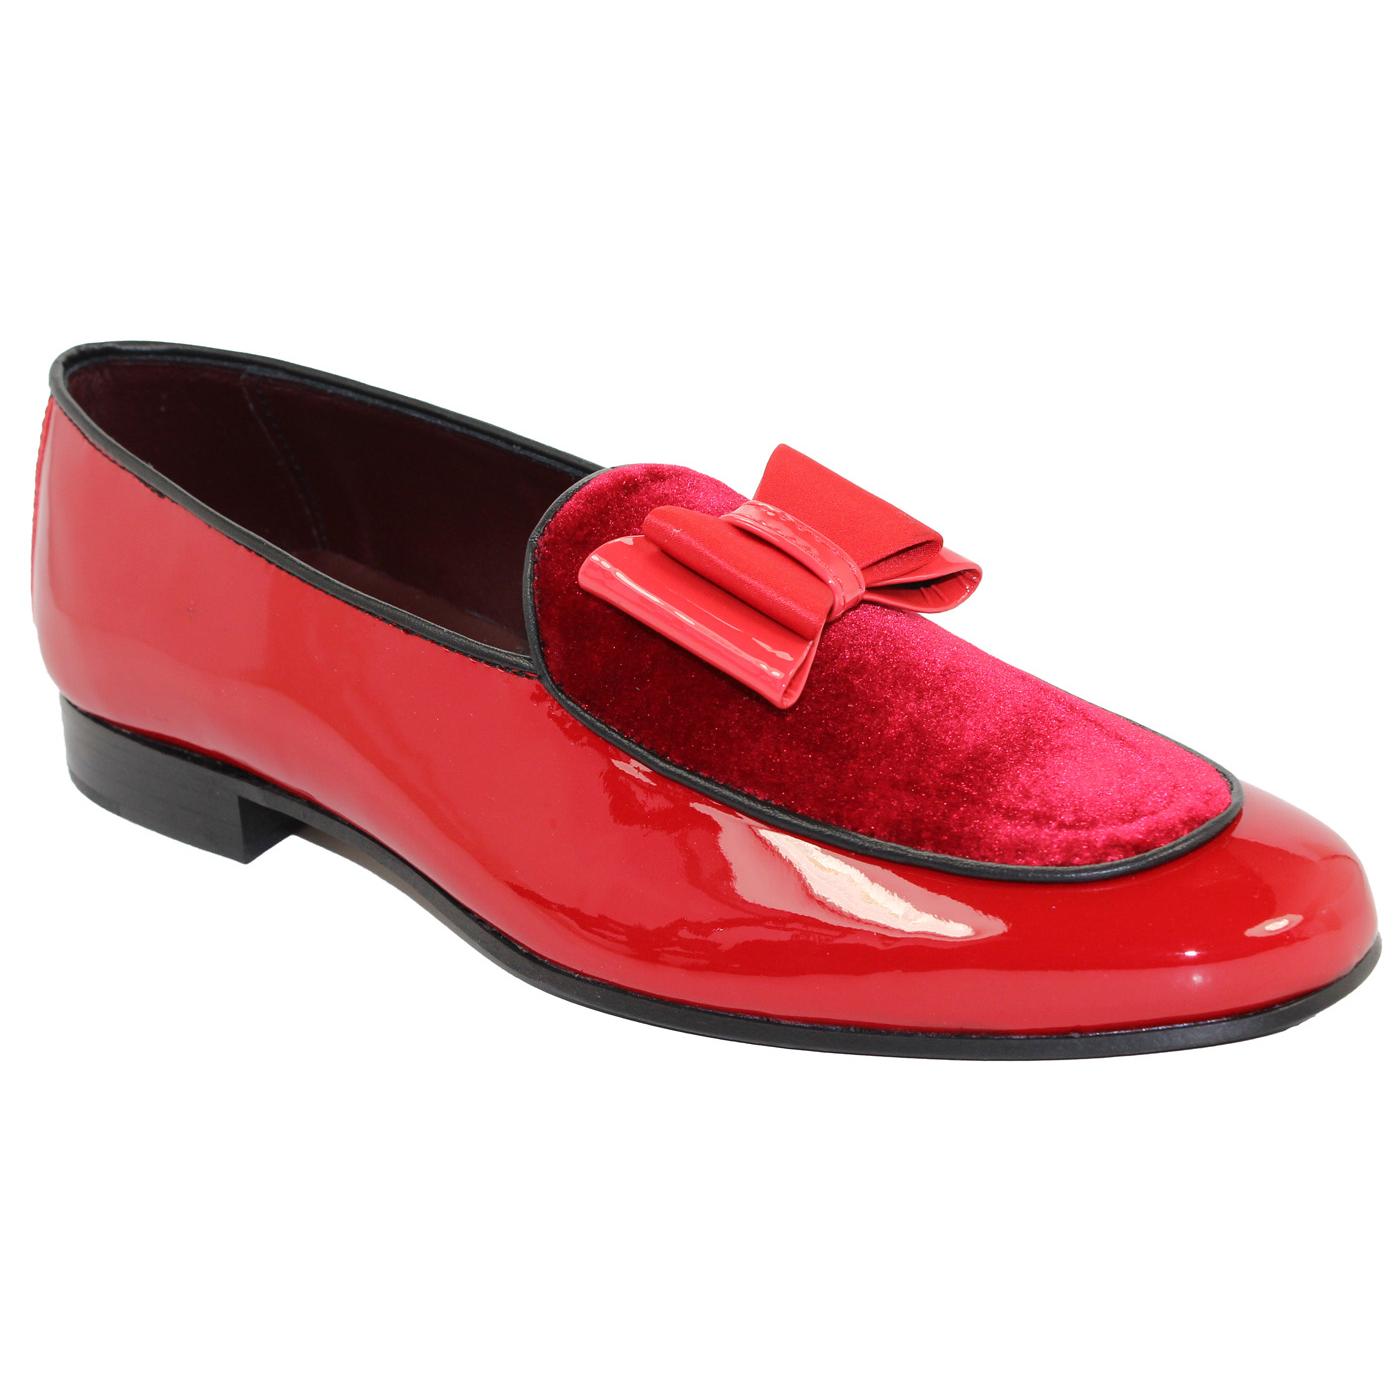 Amalfi Red Velvet Shoe with Bow Tie | Duca Di Matiste